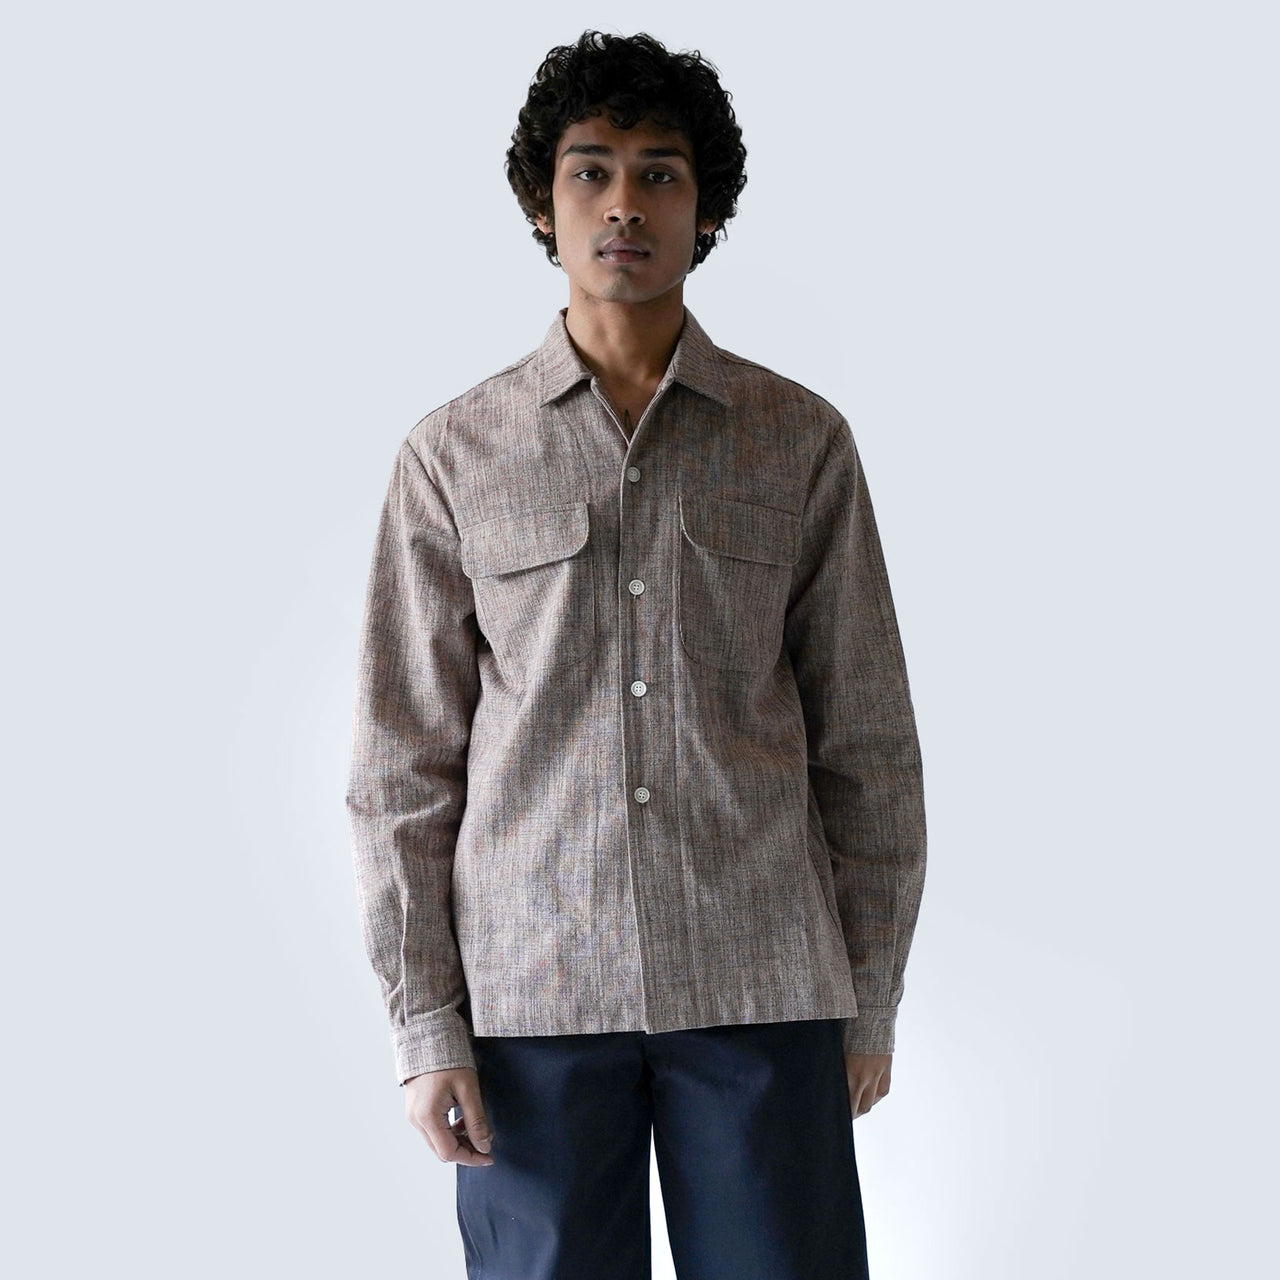 The Cantonment Shirt (Brown Tweed)